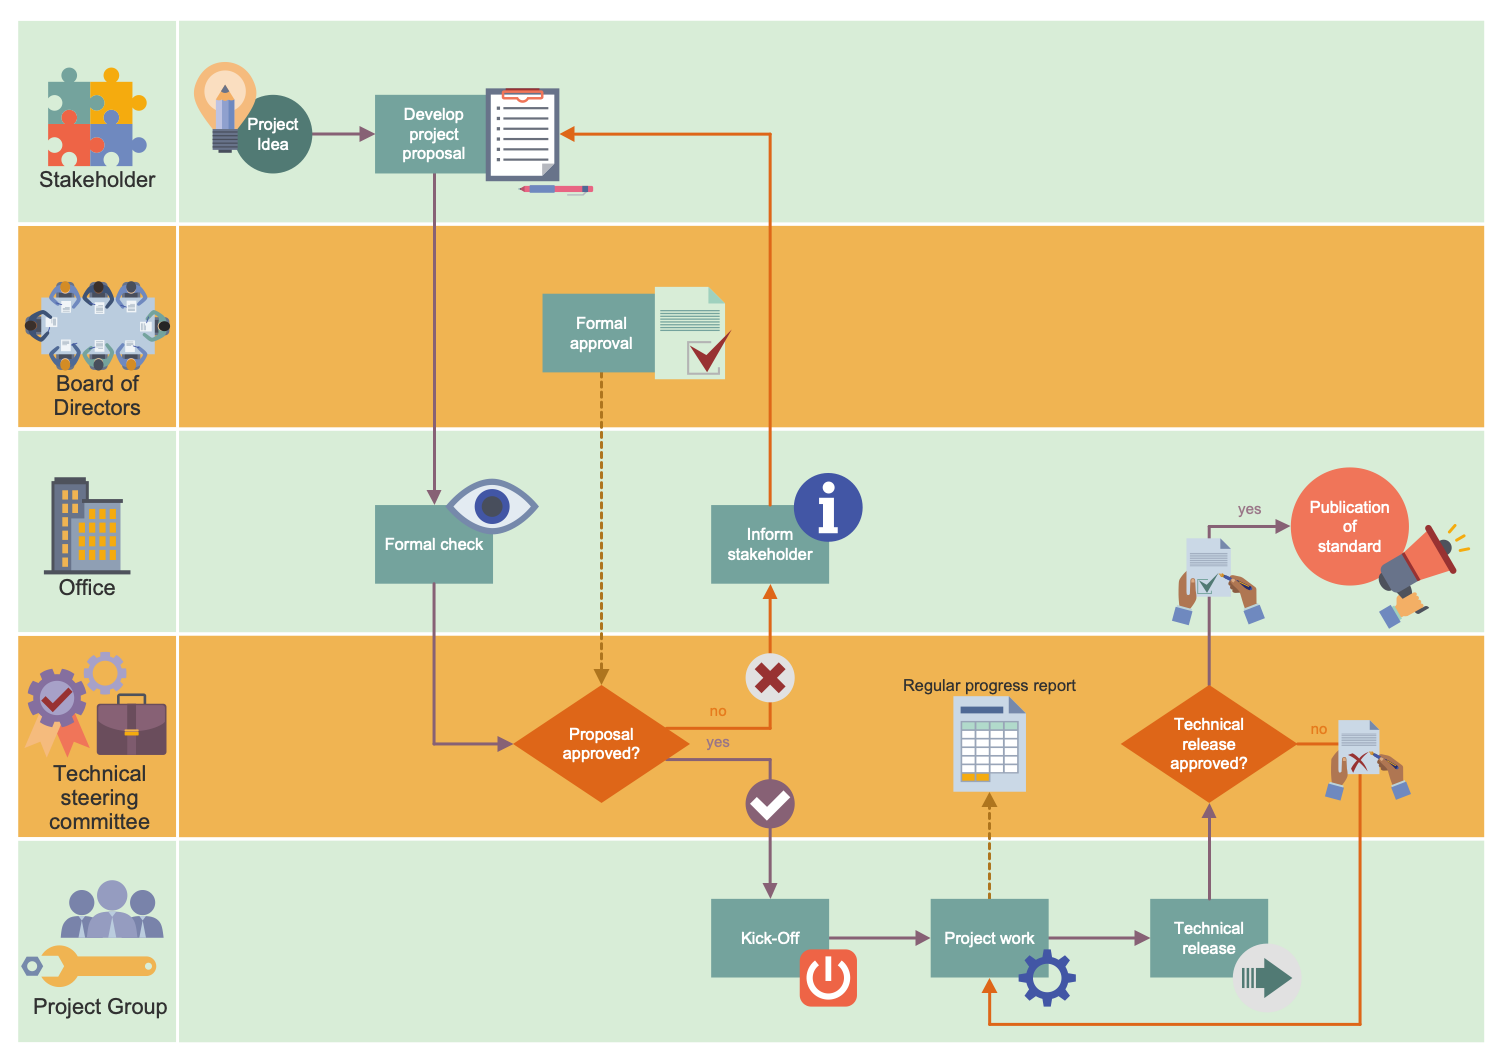 Business Process Workflow Diagram - Life Cycle of an ASAM Standard